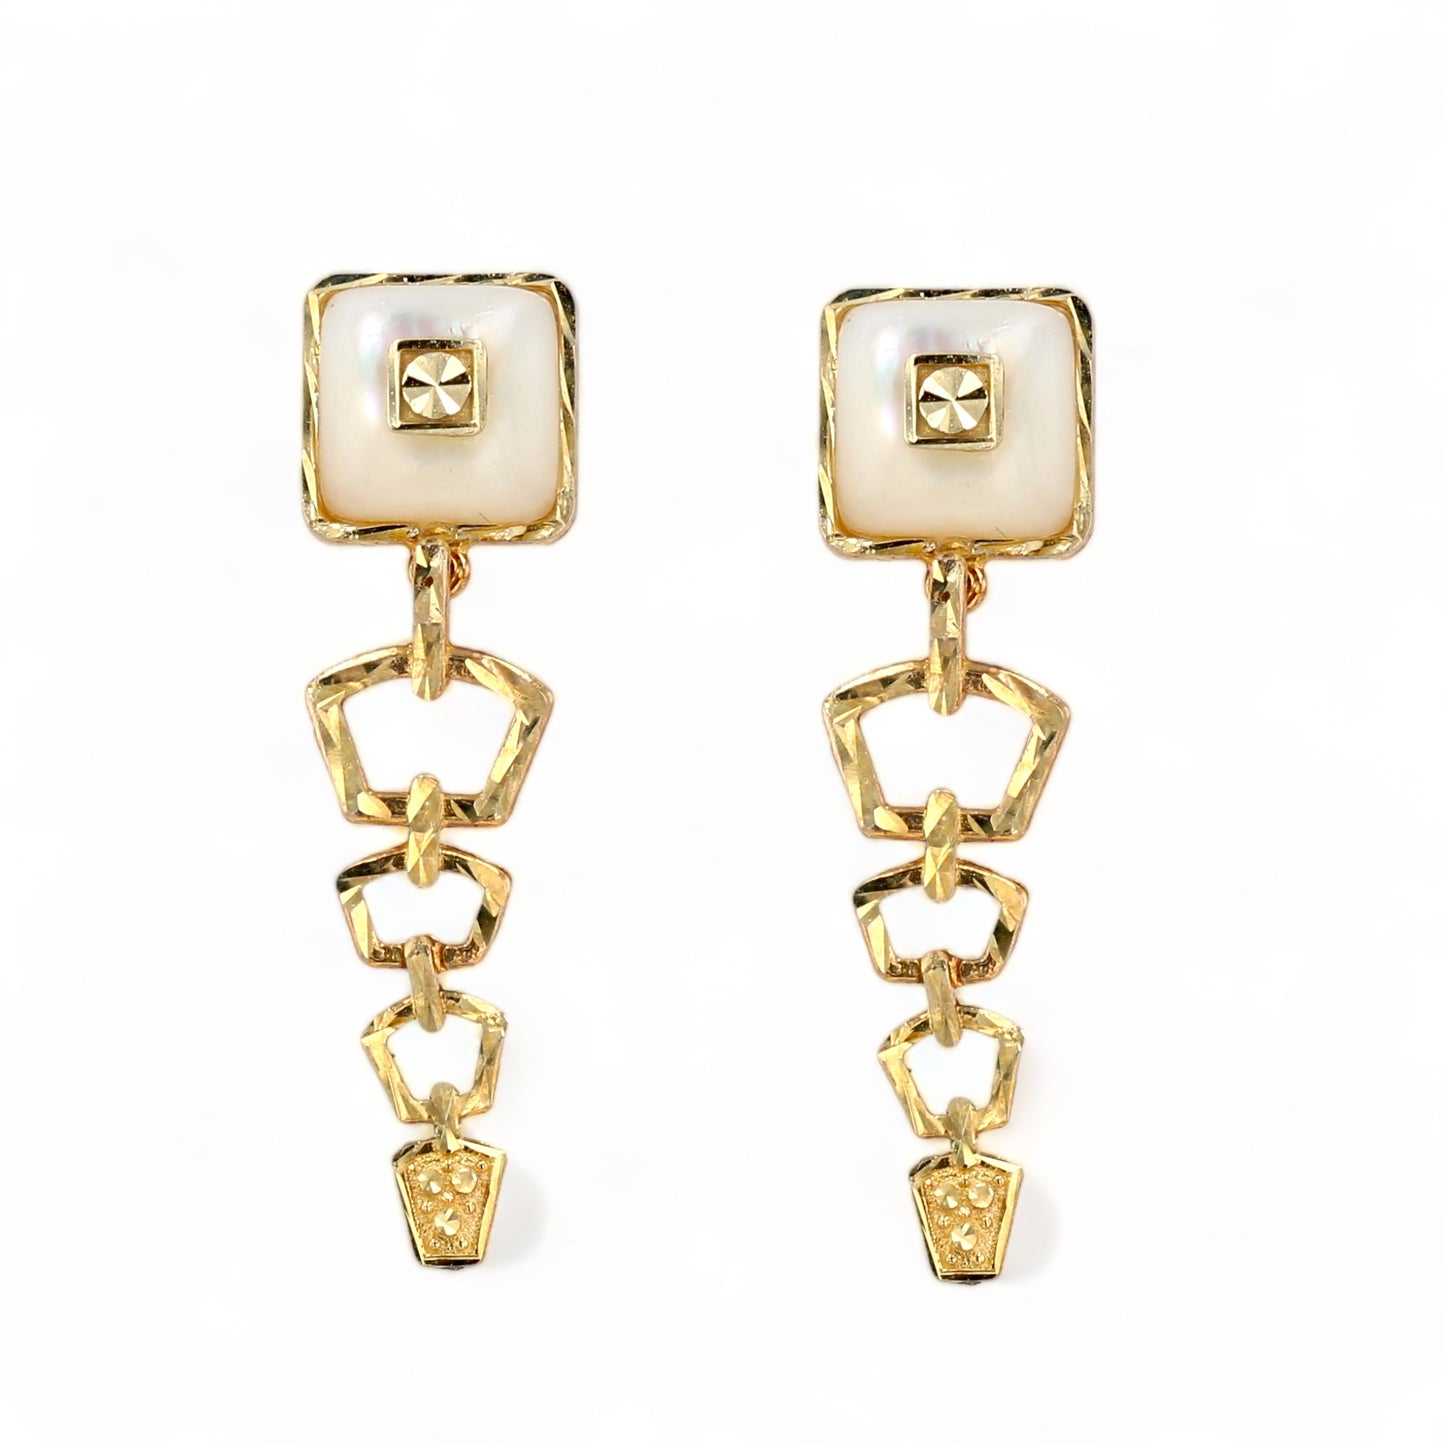 14K Yellow gold Picassa dangling mother pearl studs earrings-12849